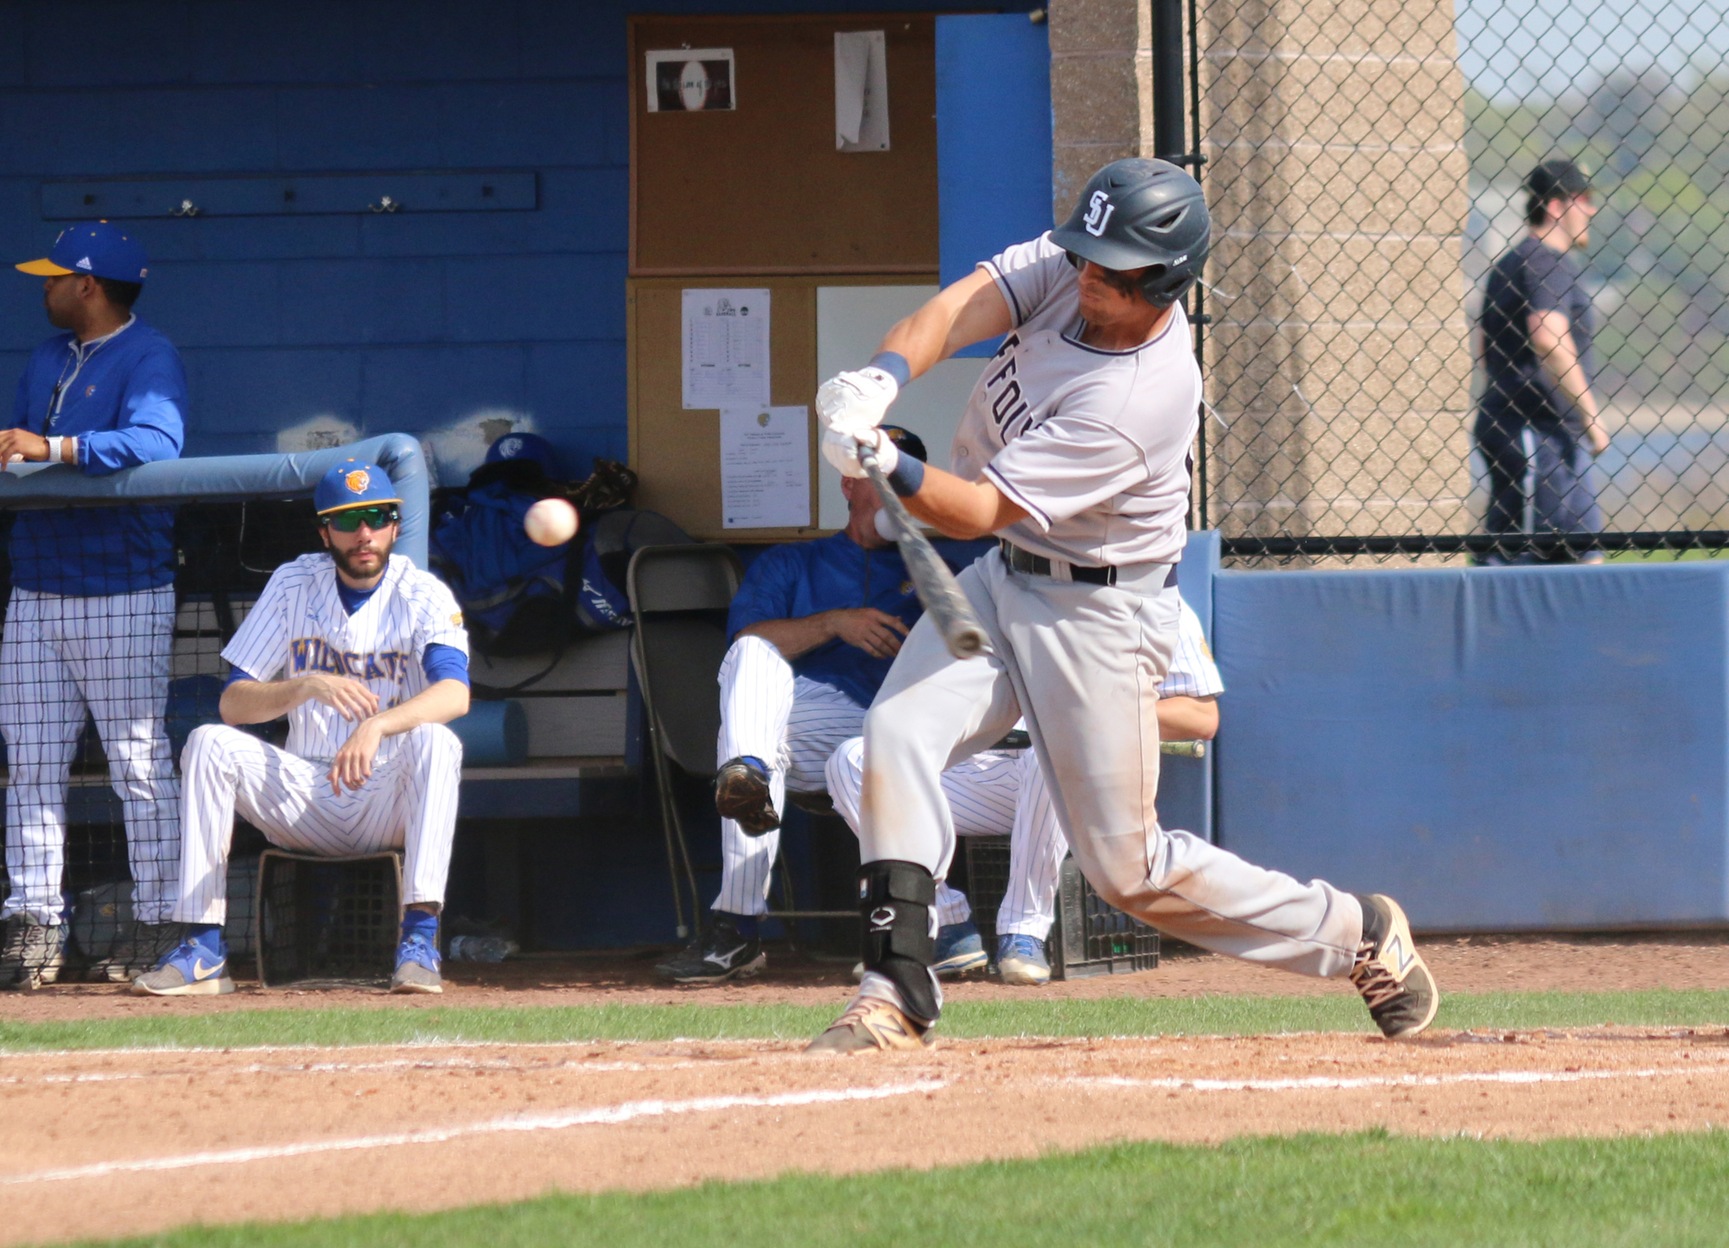 Tests at Bates, Worcester State Prepare Baseball for NCAAs